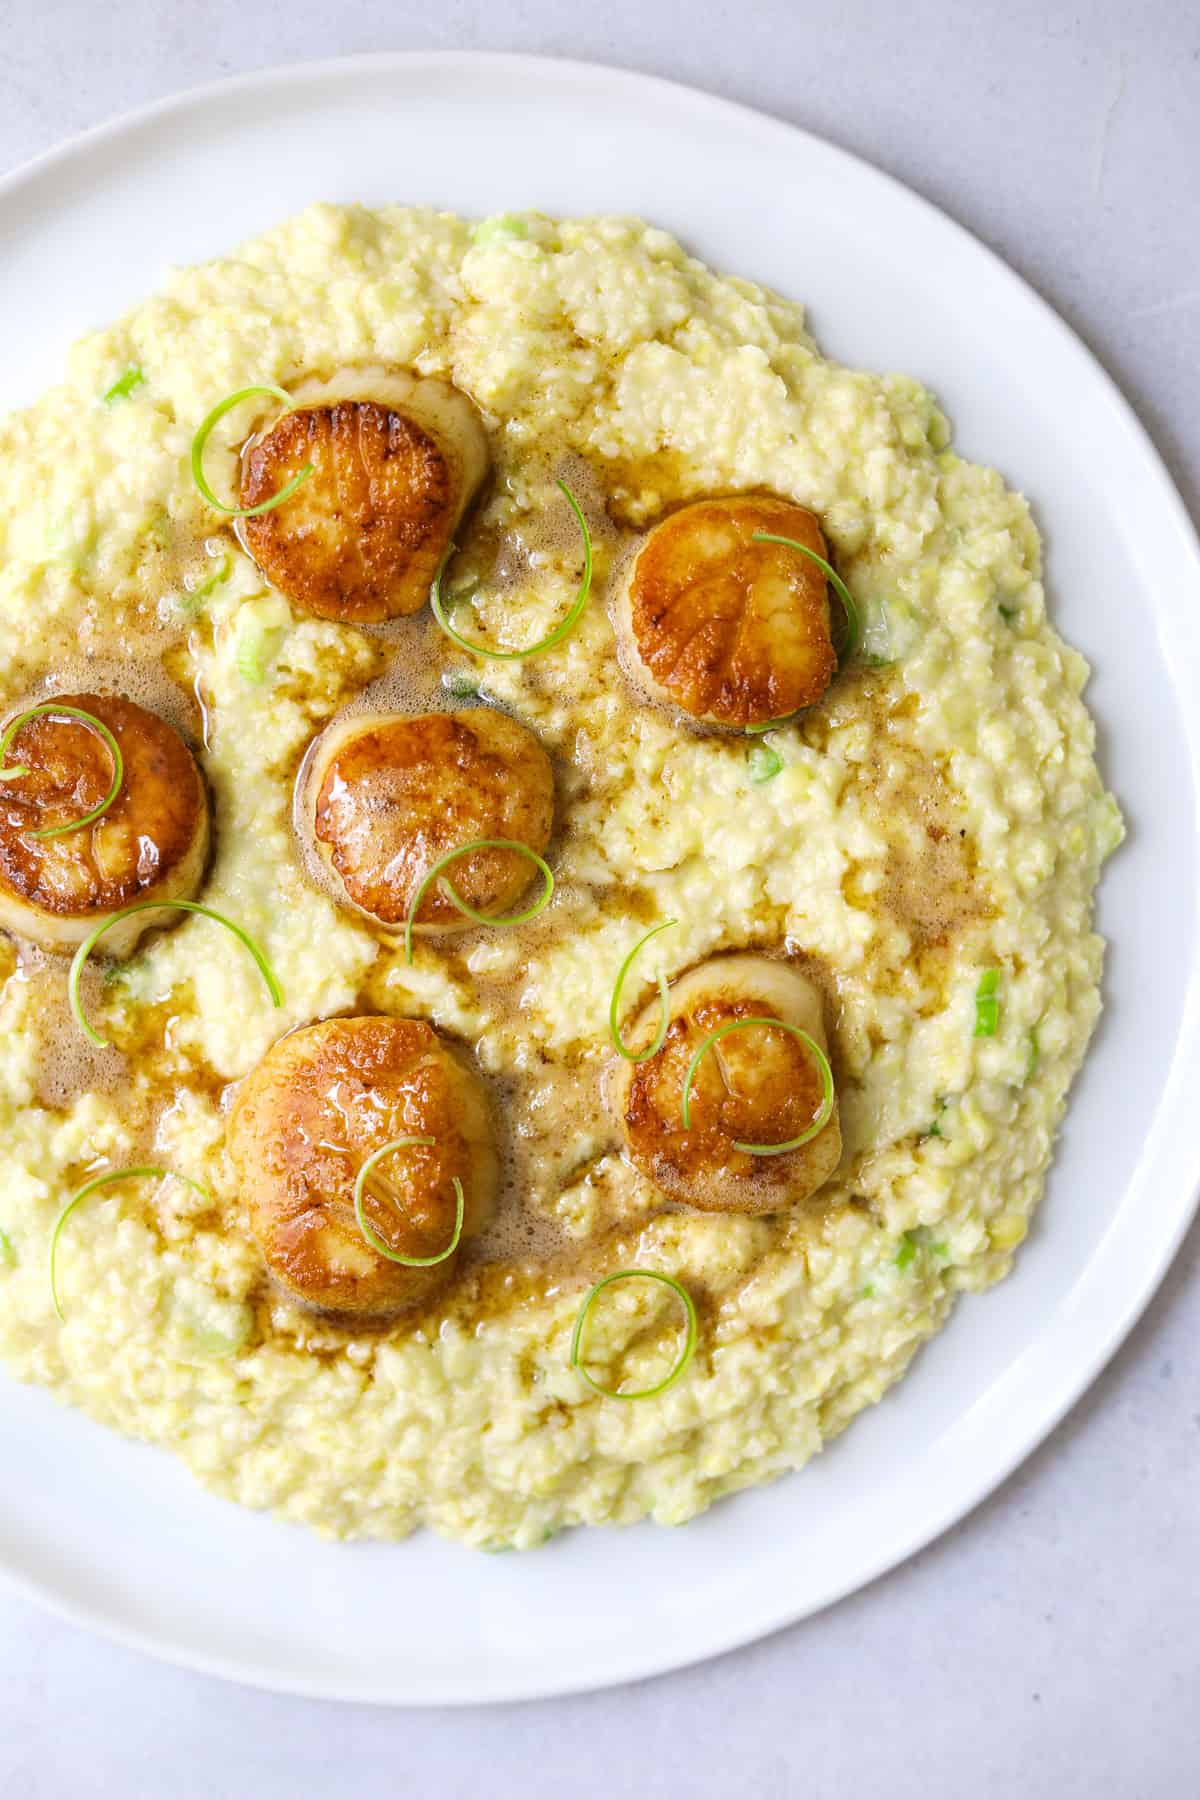 a plate of creamy corn porridge topped with golden-brown seared scallops, melted brown butter and sliced green onion